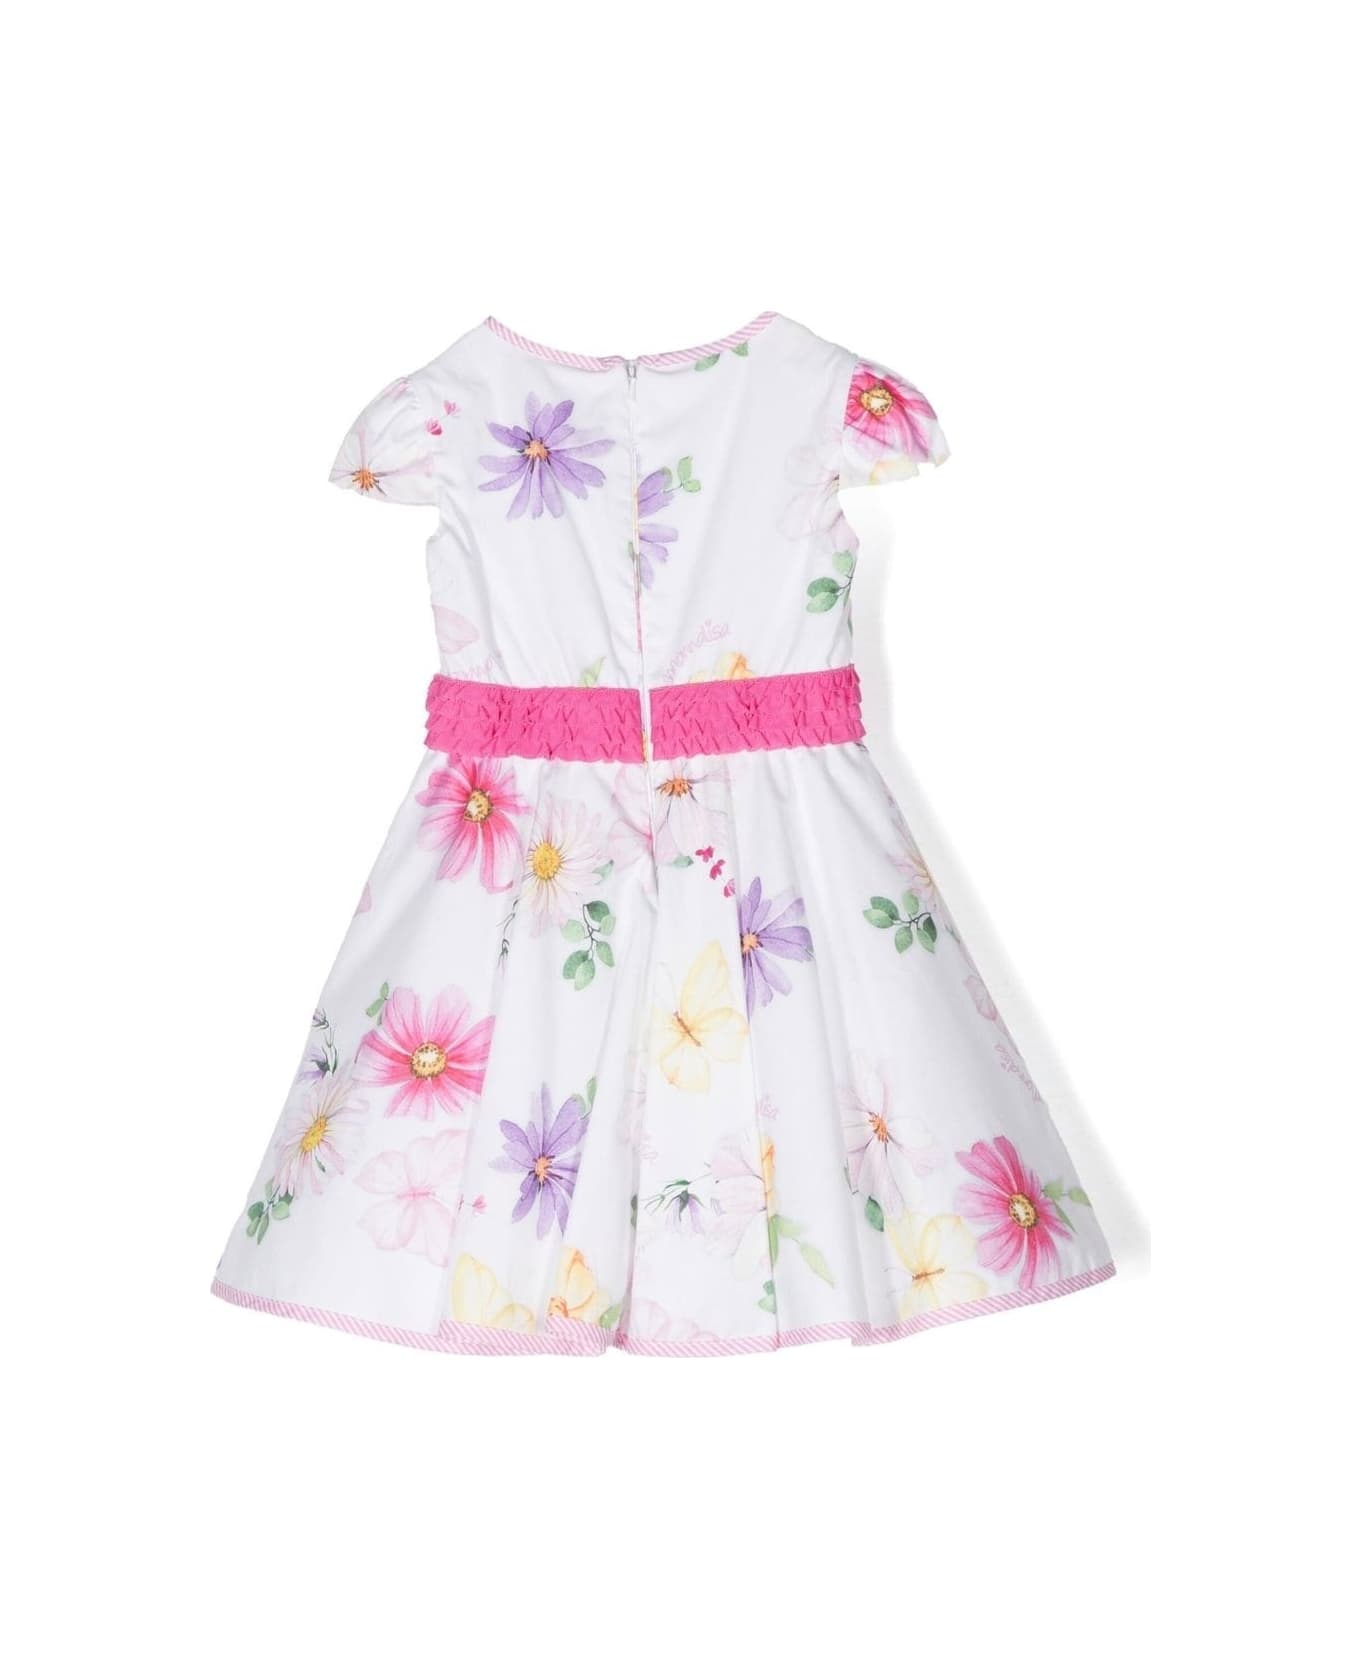 Monnalisa White Short Sleeves Dress With All-over Floreal Print In Cotton Girl - MULTICOLOR